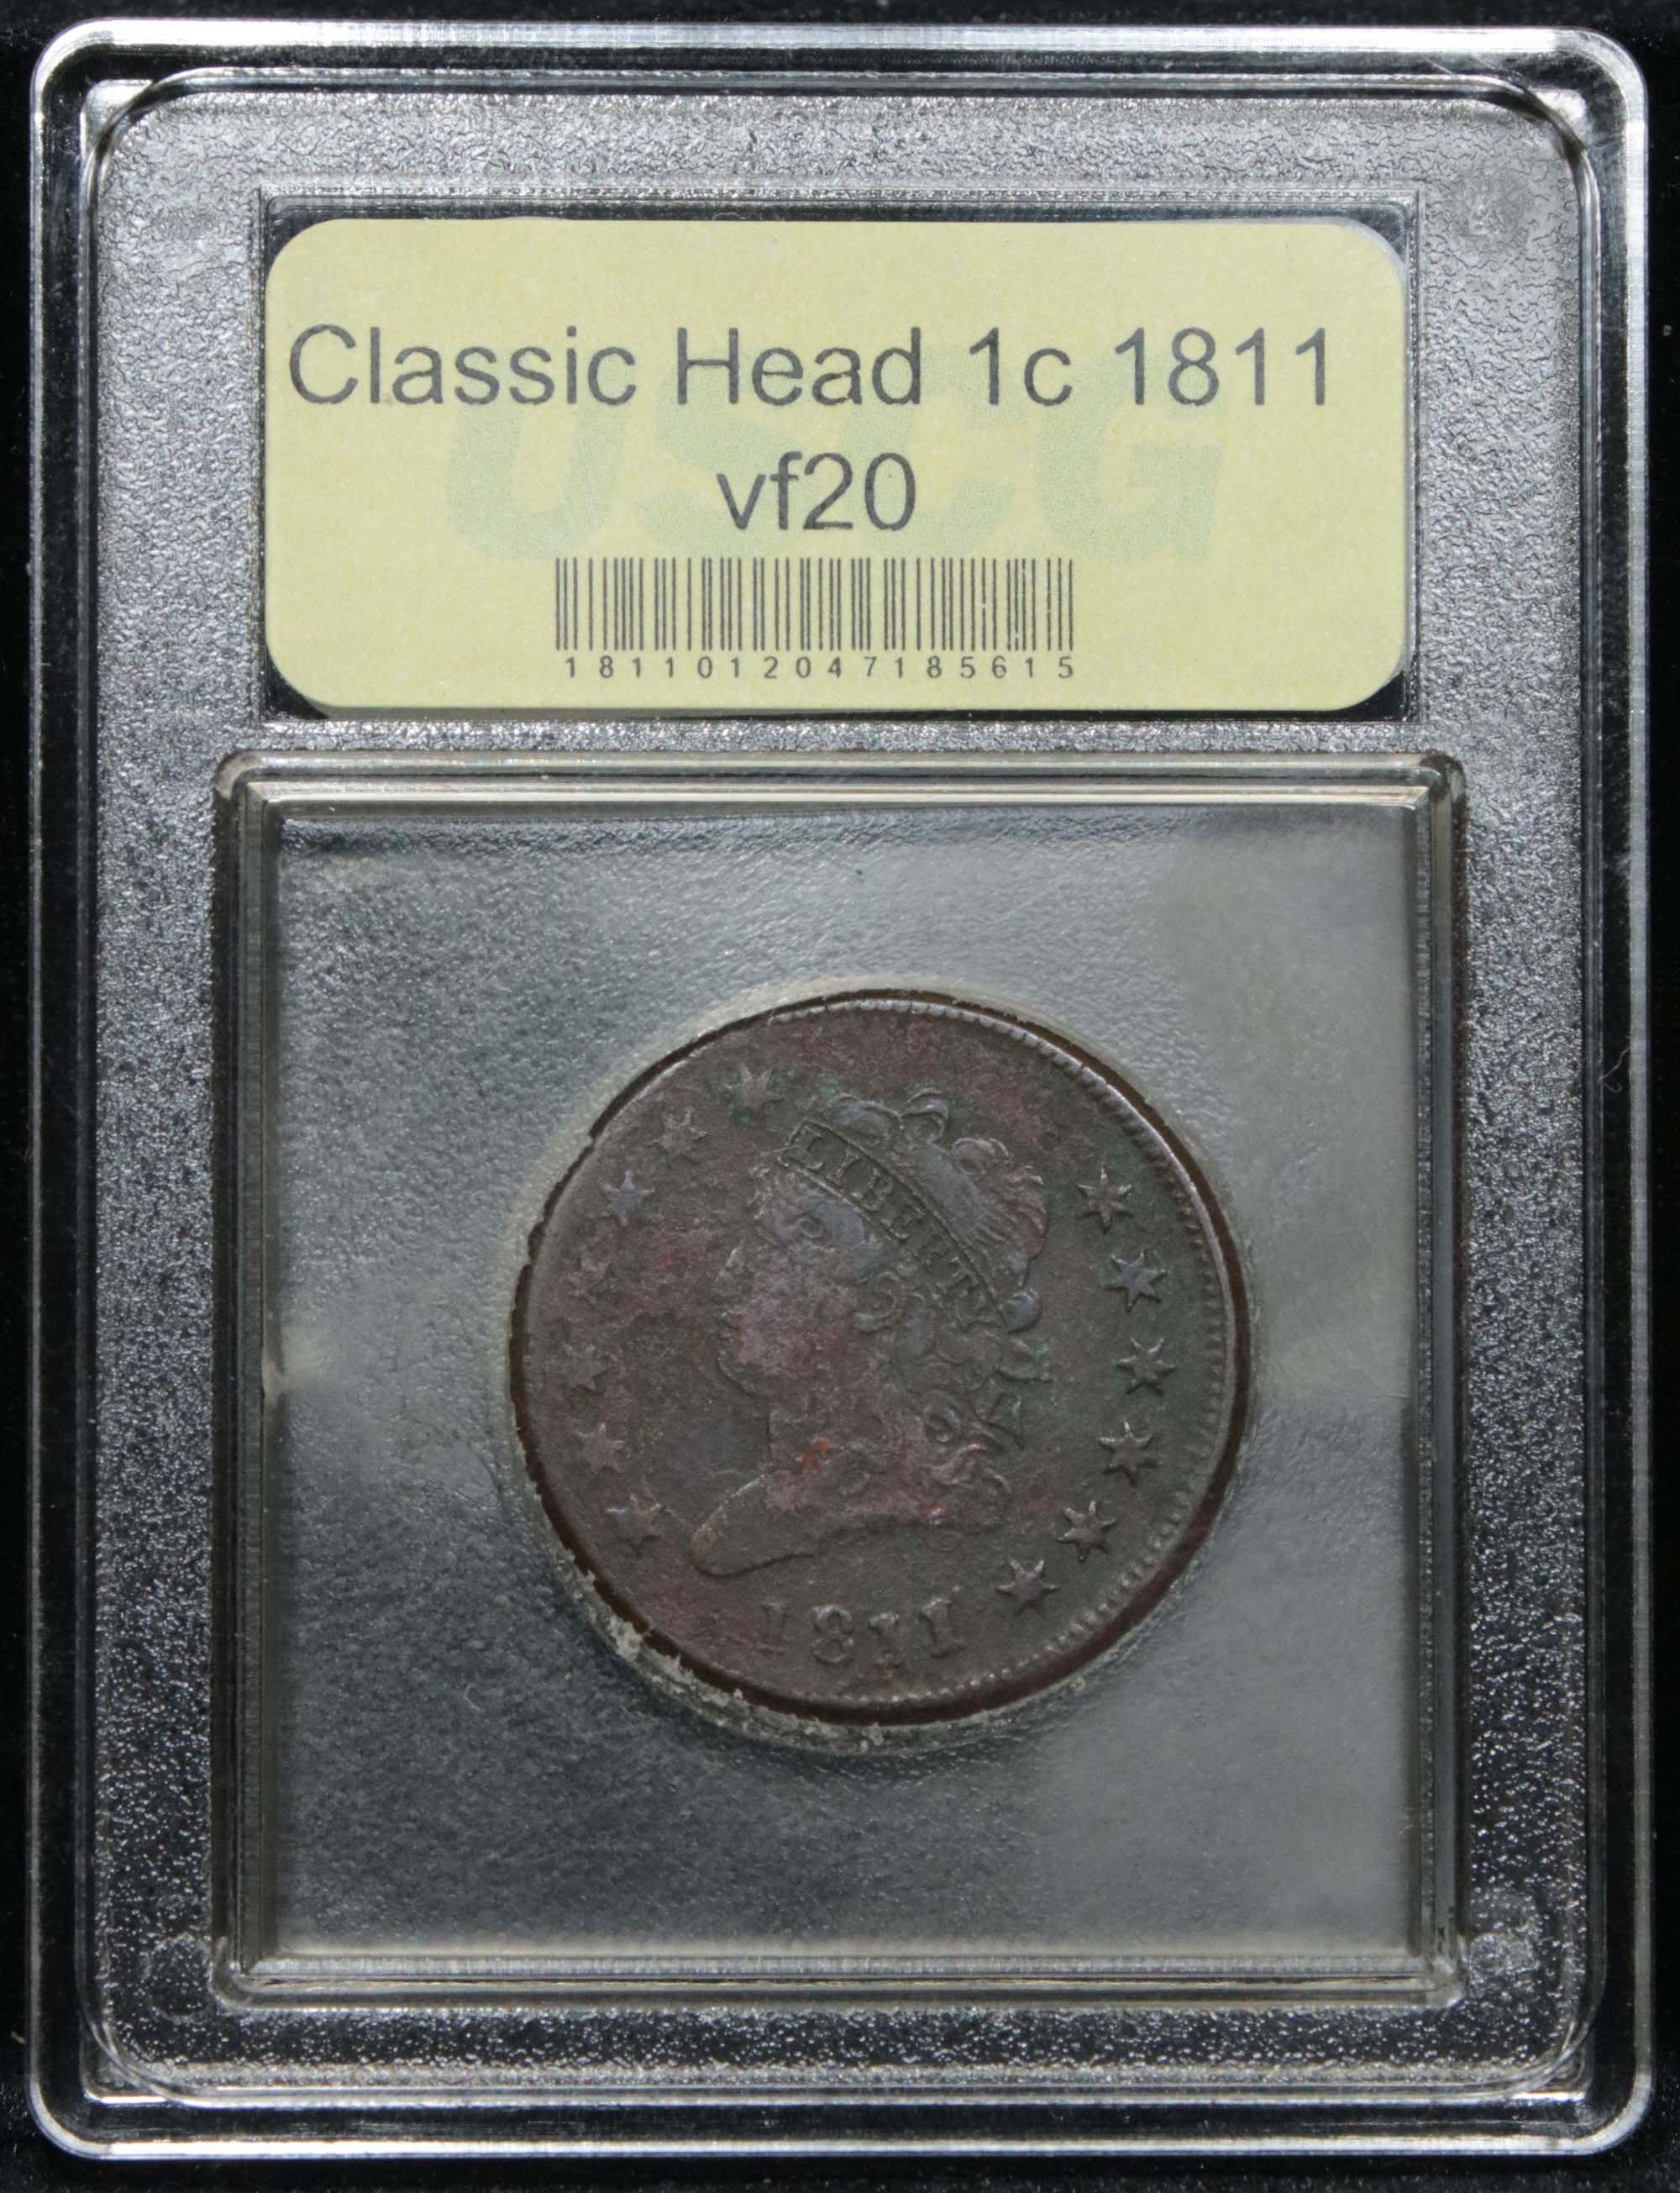 ***Auction Highlight*** Early Date 1811 Classic Head Large Cent 1c Graded vf, very fine by USCG (fc)